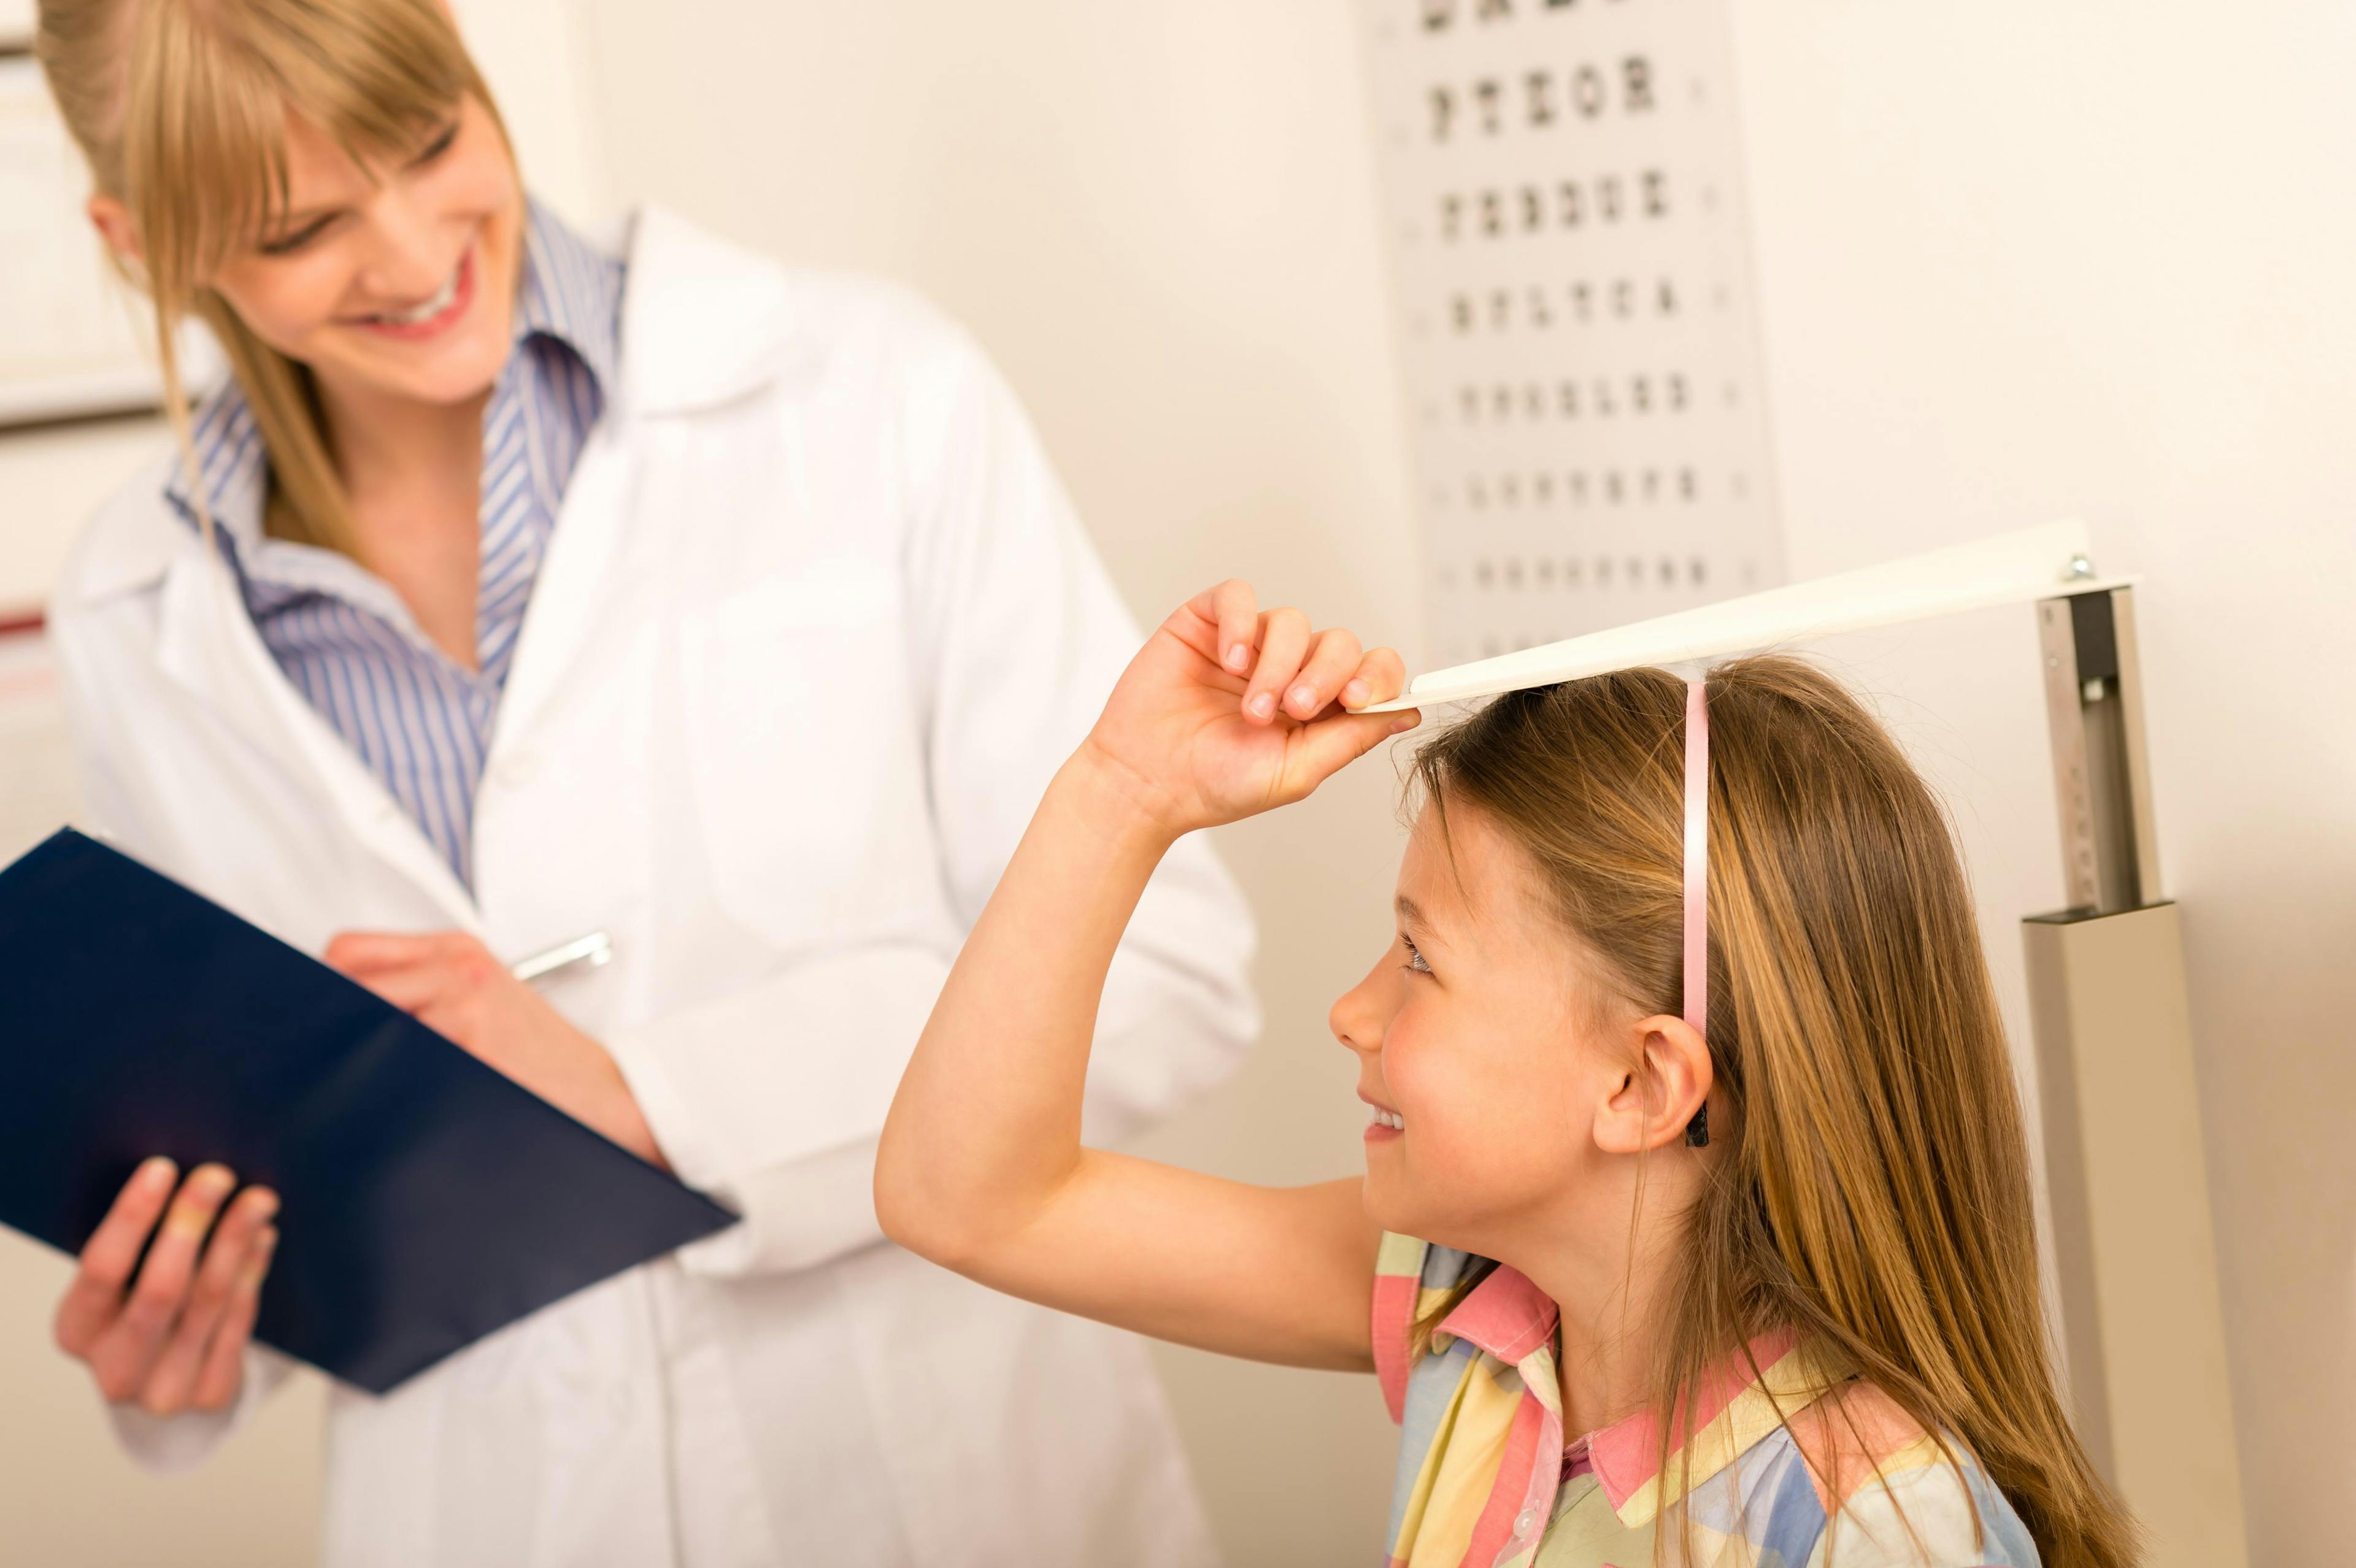 Child being measured during a pediatrician visit